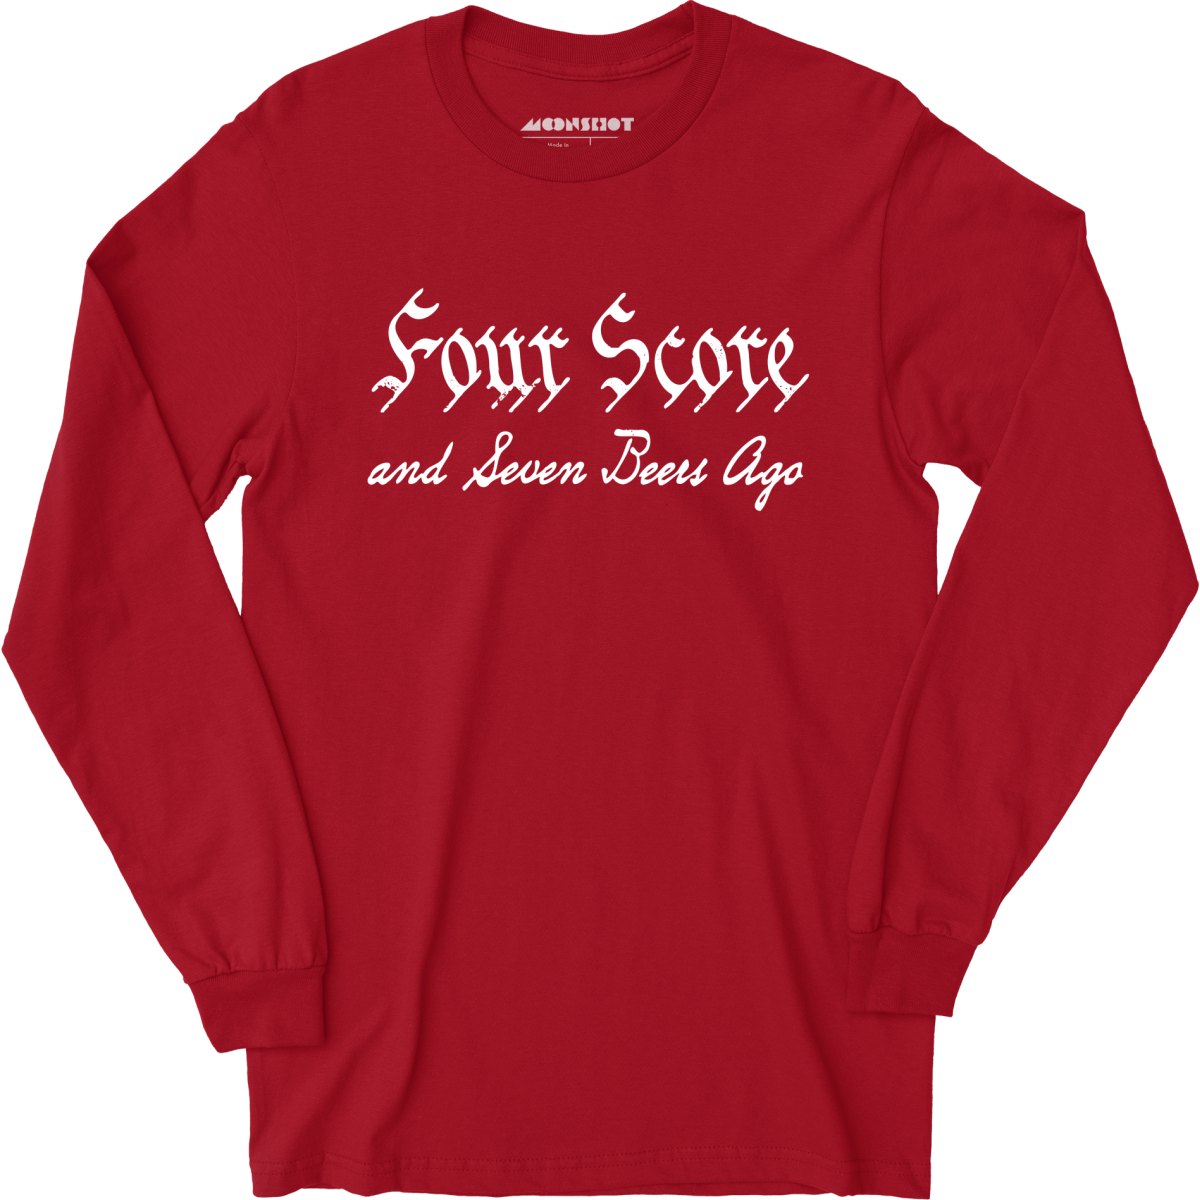 Four Score and Seven Beers Ago - Long Sleeve T-Shirt